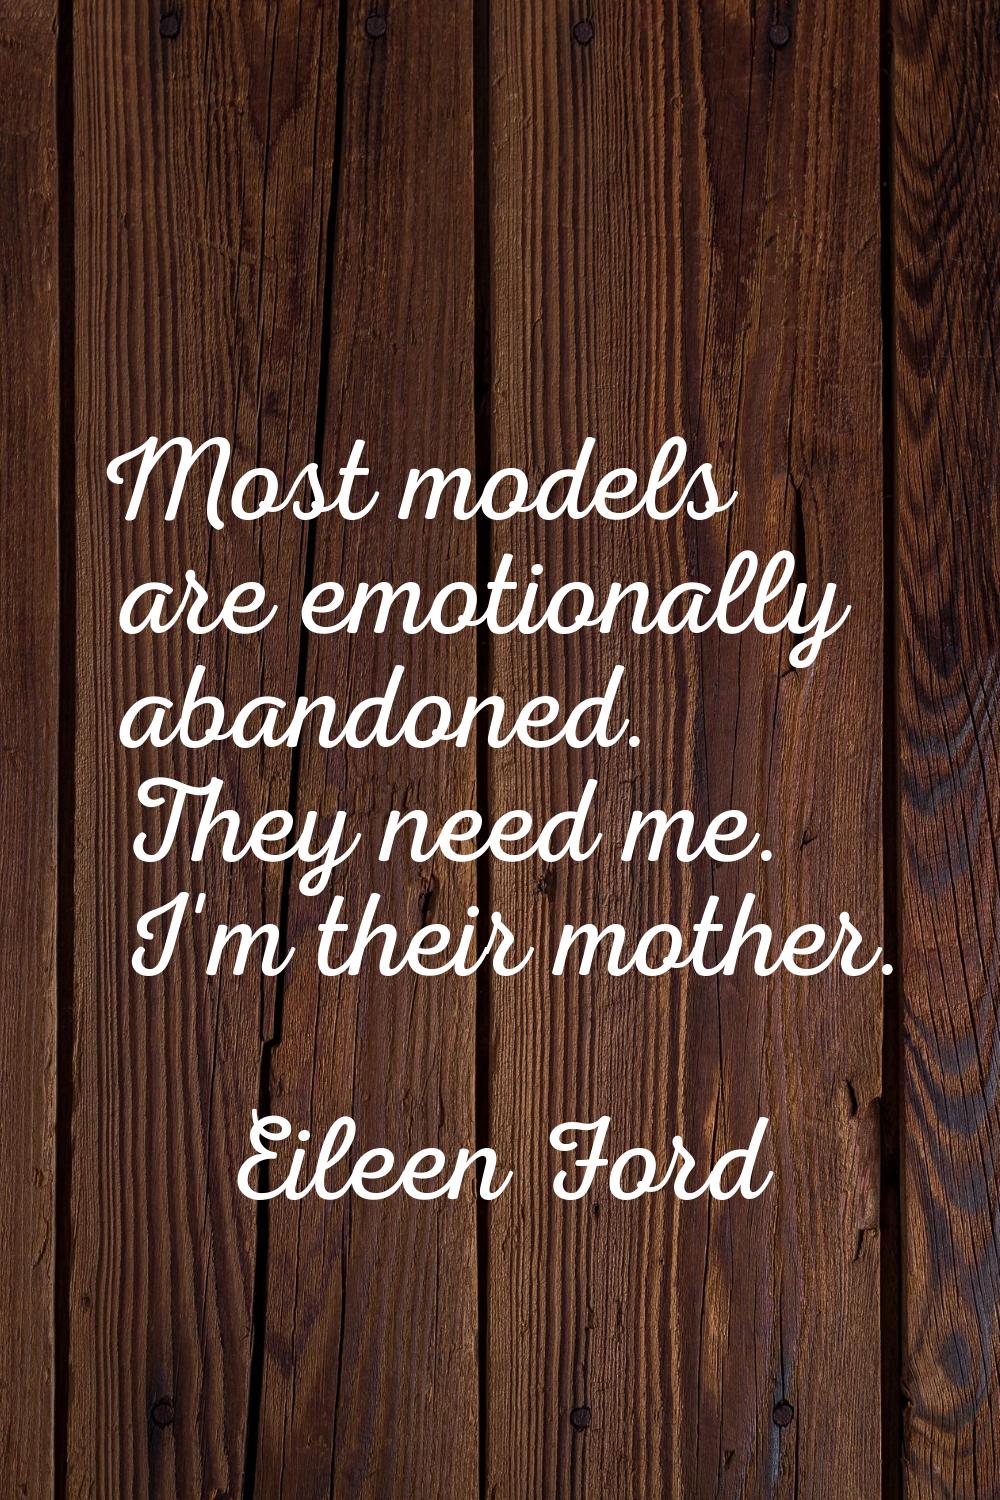 Most models are emotionally abandoned. They need me. I'm their mother.